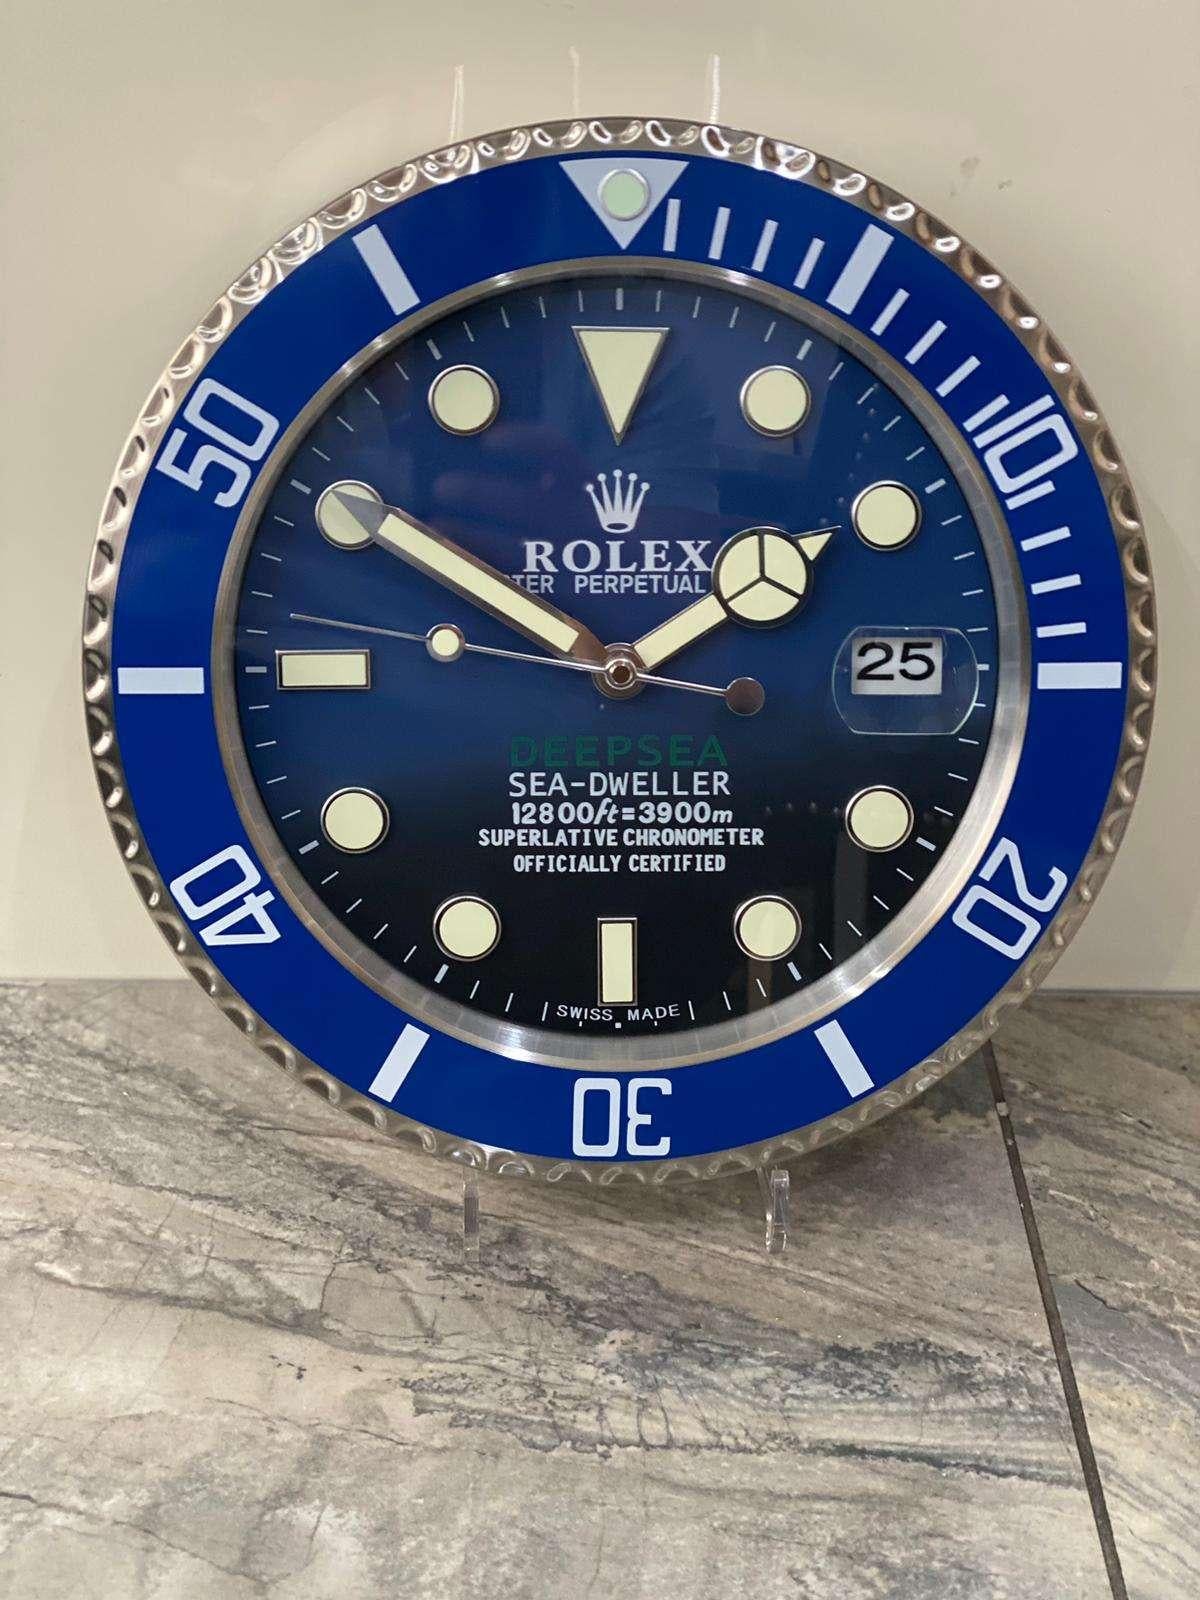 ROLEX Officially Certified Oyster Perpetual Blue Deepsea Sea Dweller Wall Clock 
Good condition, working.
Lume strips Sweeping Quartz movement powered by single AA Battery.
Clock dimensions measure approximately 35cm by 5cm thickness
Free